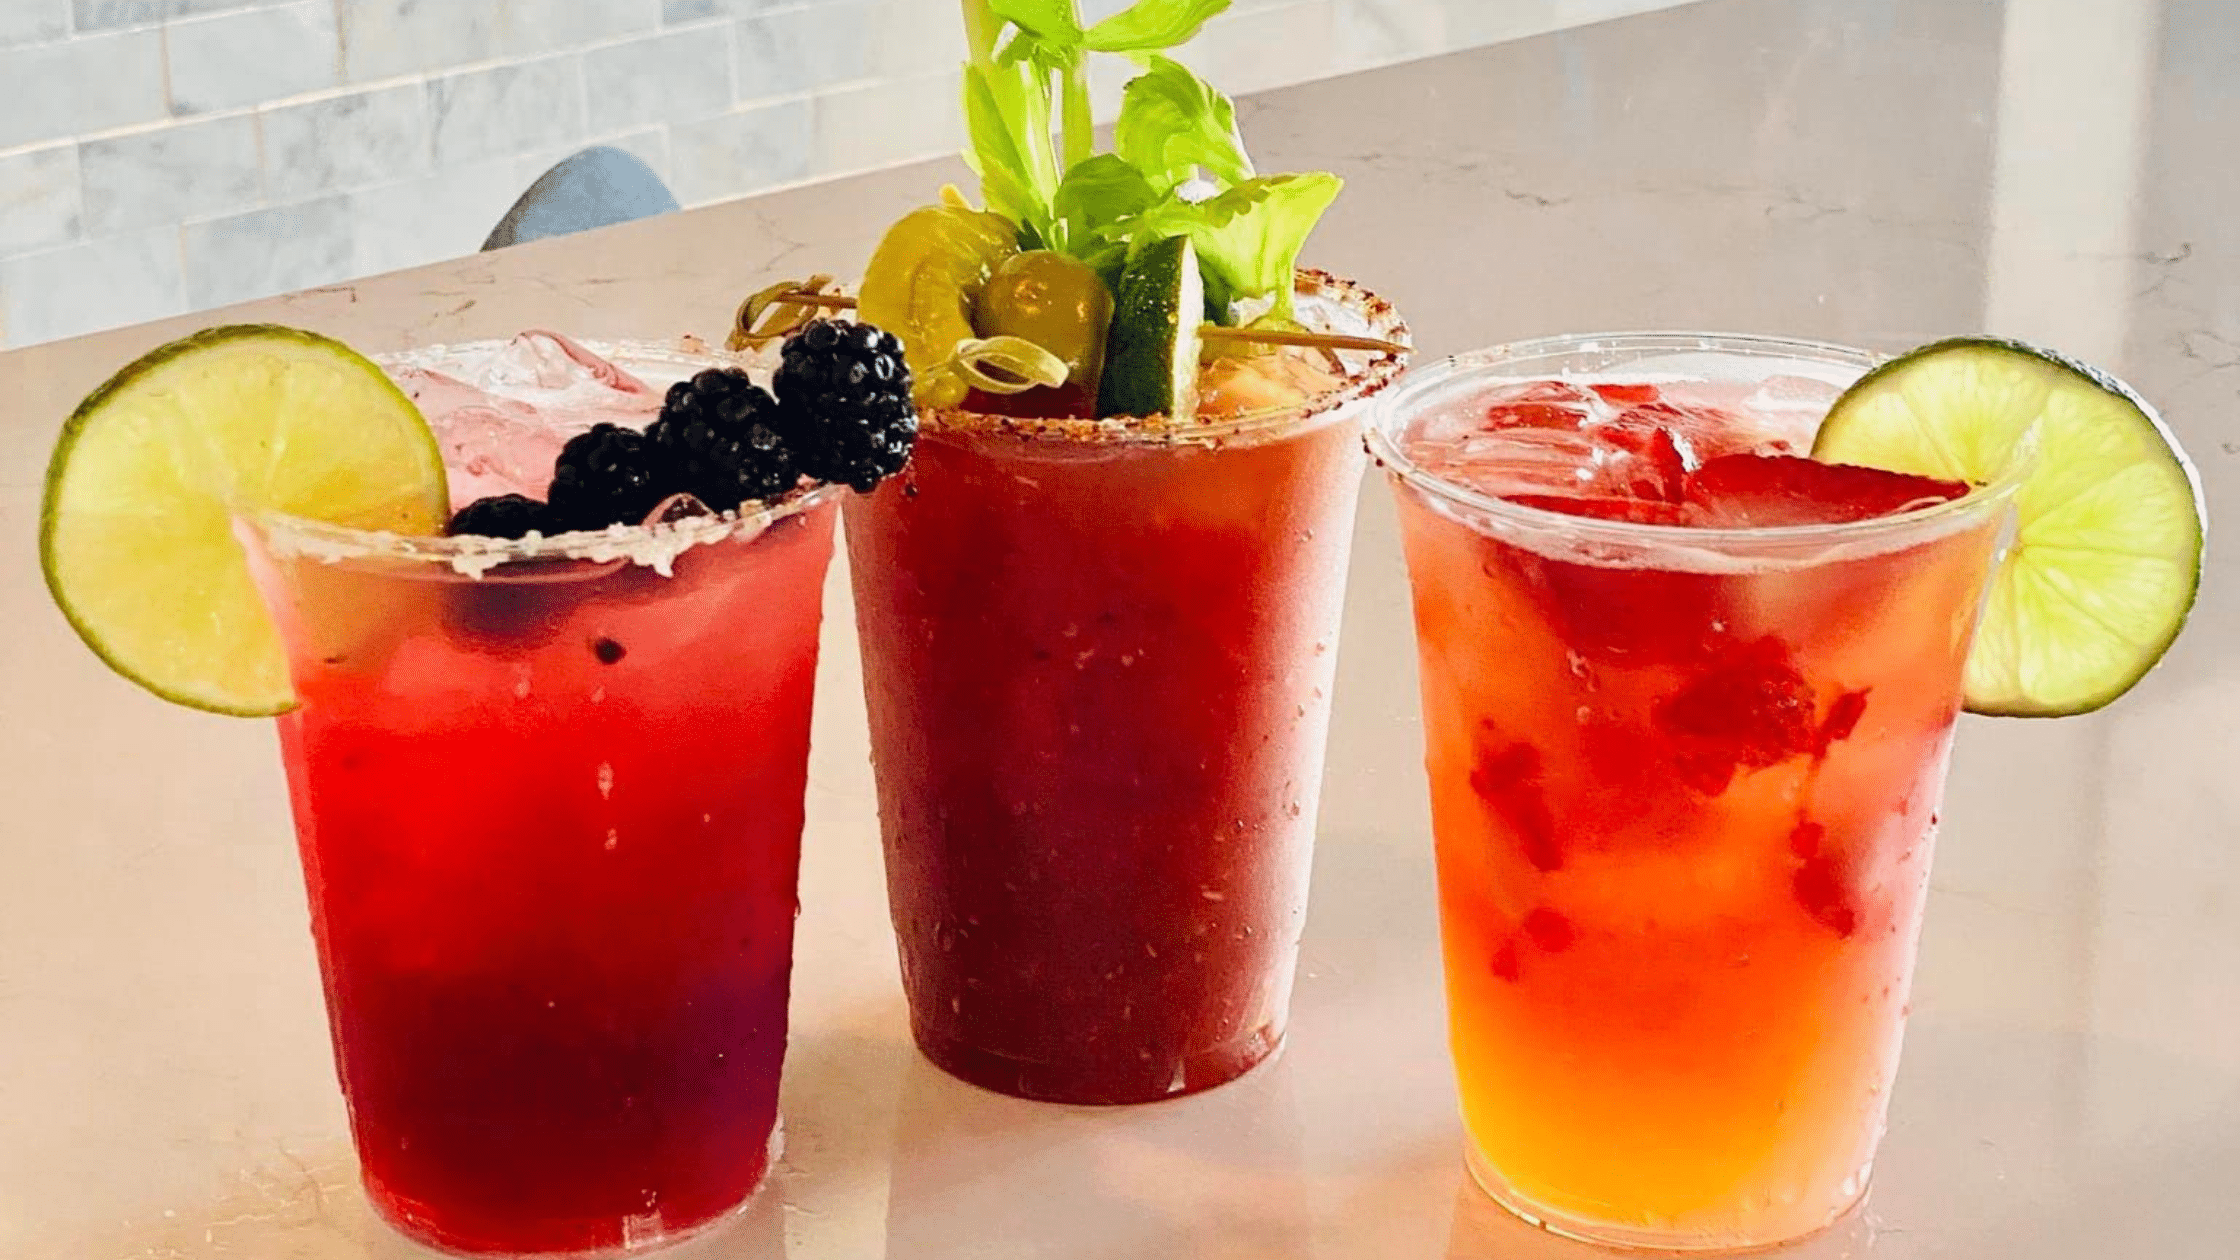 Three red and orange drinks with garnishes